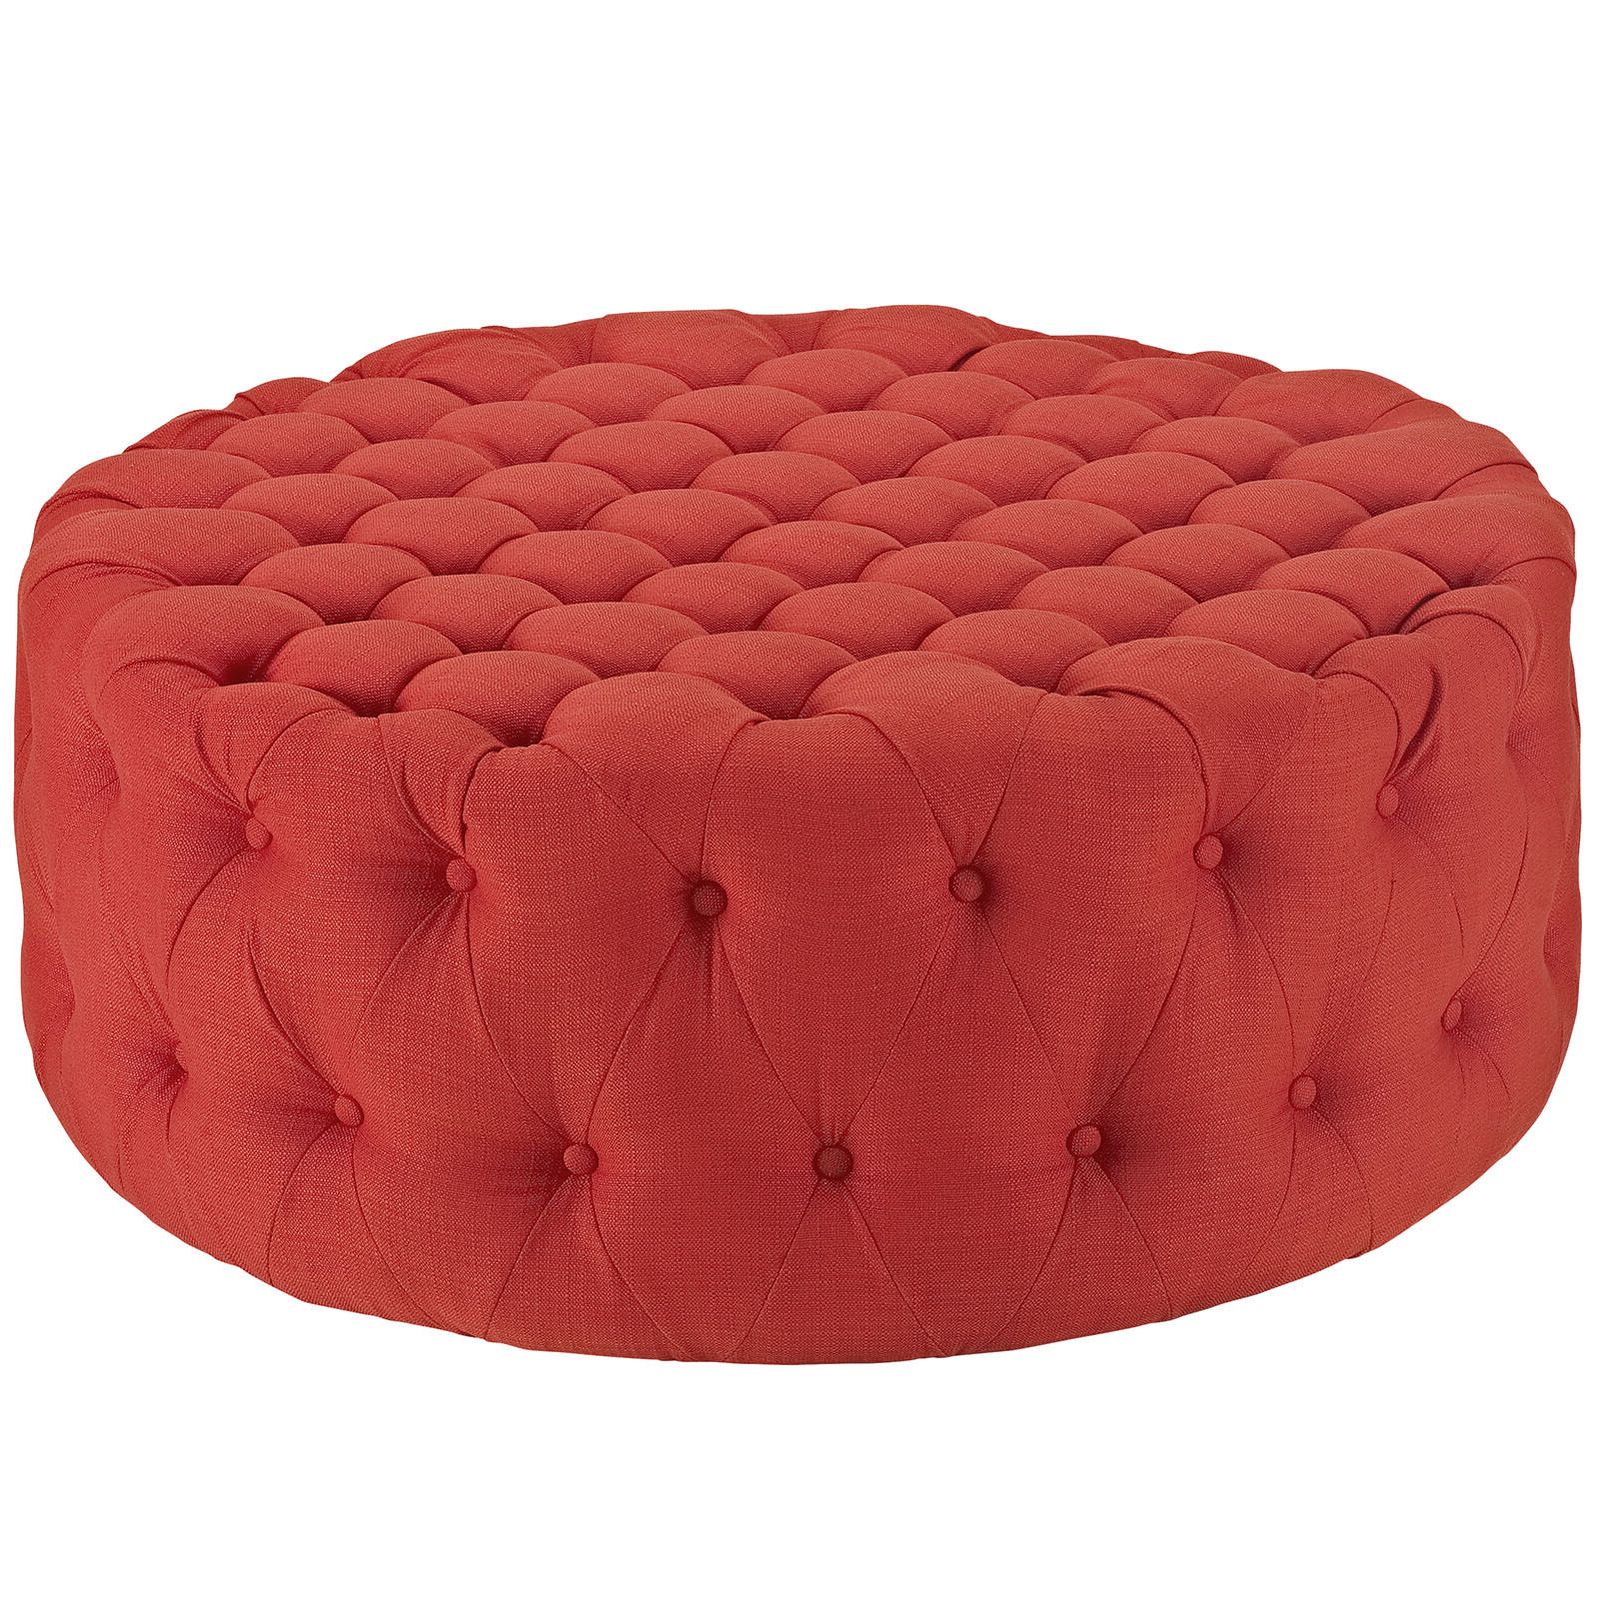 Fabric Tufted Round Storage Ottomans In Favorite Button Tufted Fabric Upholstered Round Ottoman In Atomic Red (View 9 of 10)